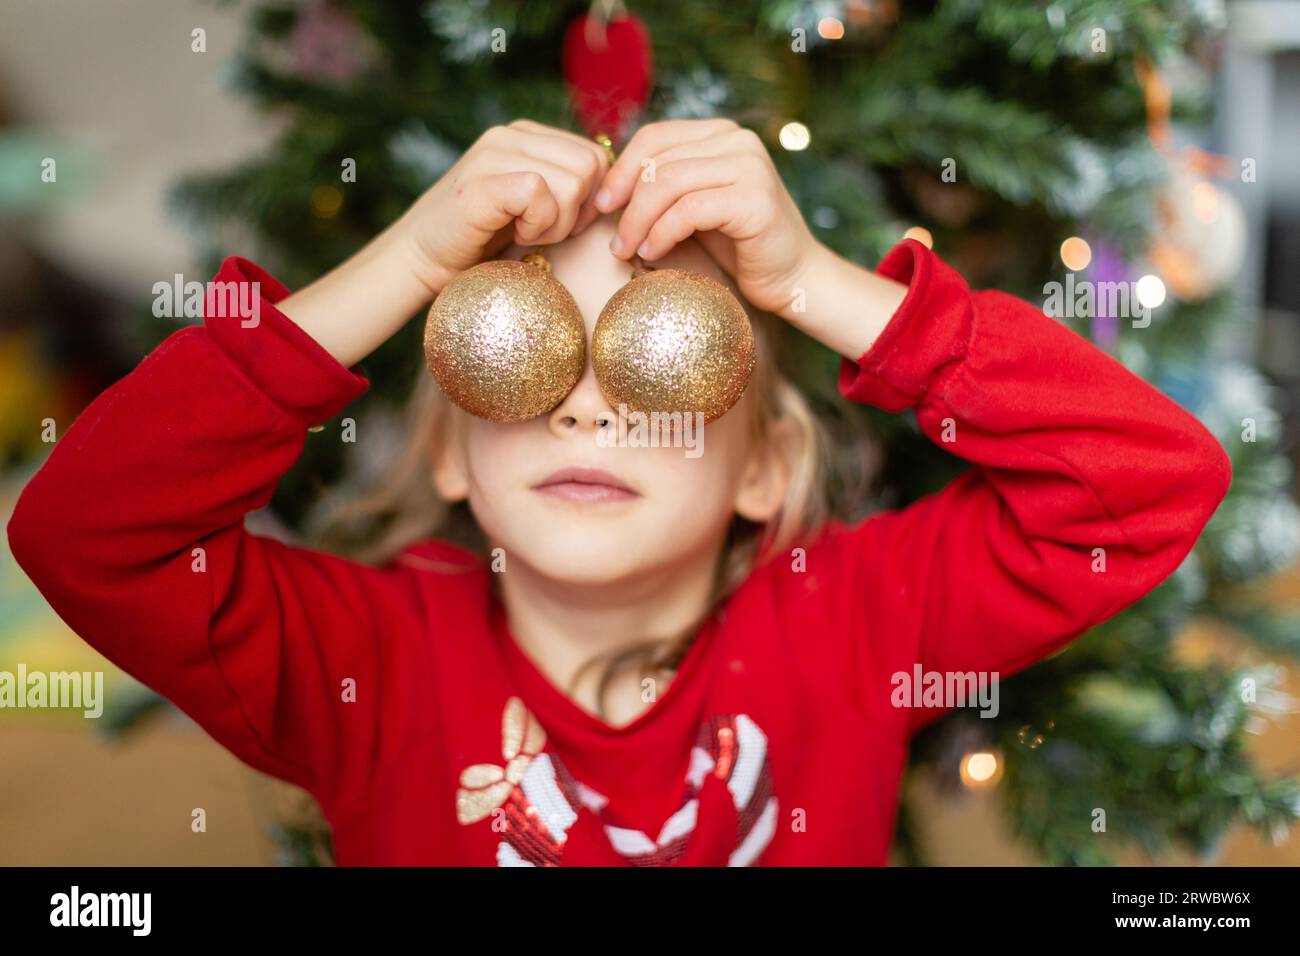 Little girl in red sweater covering eyes with baubles against Christmas tree at home Stock Photo